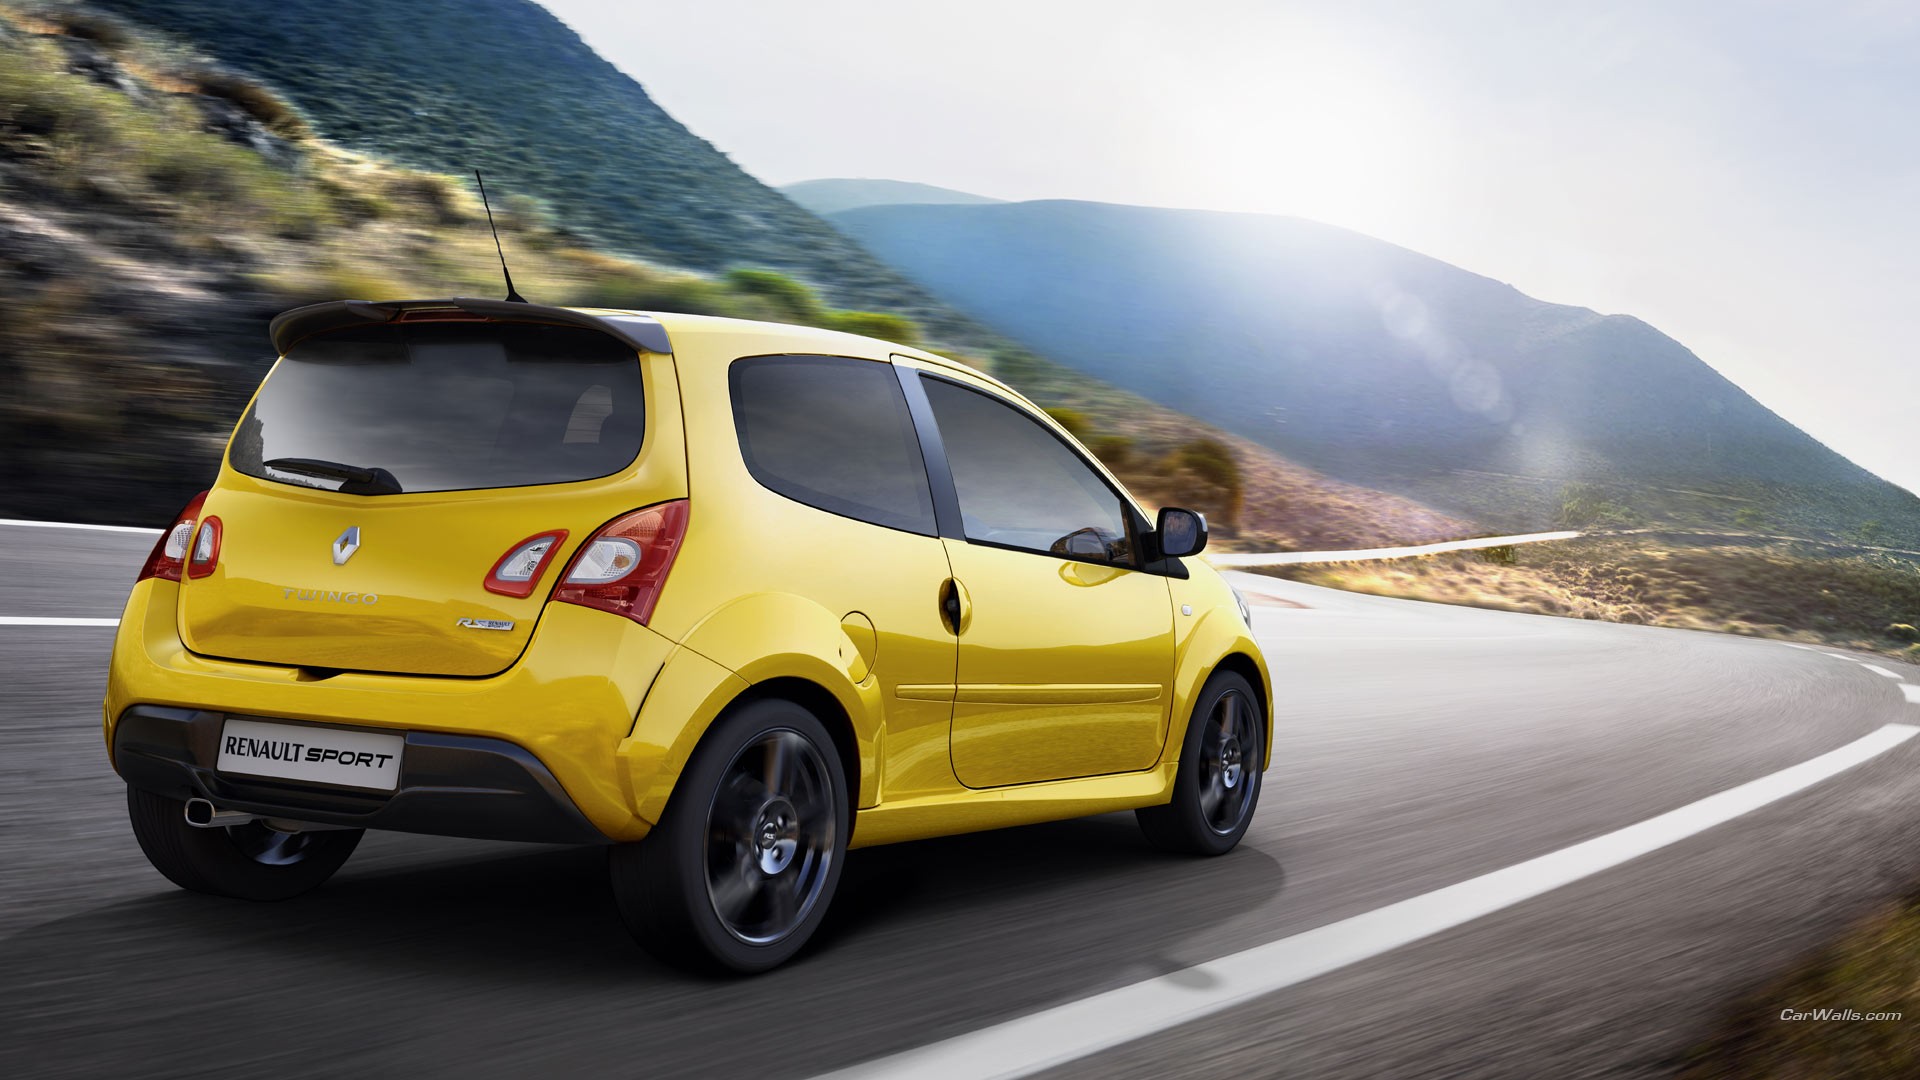 General 1920x1080 Renault Twingo car yellow cars Renault vehicle French Cars hatchbacks hot hatch